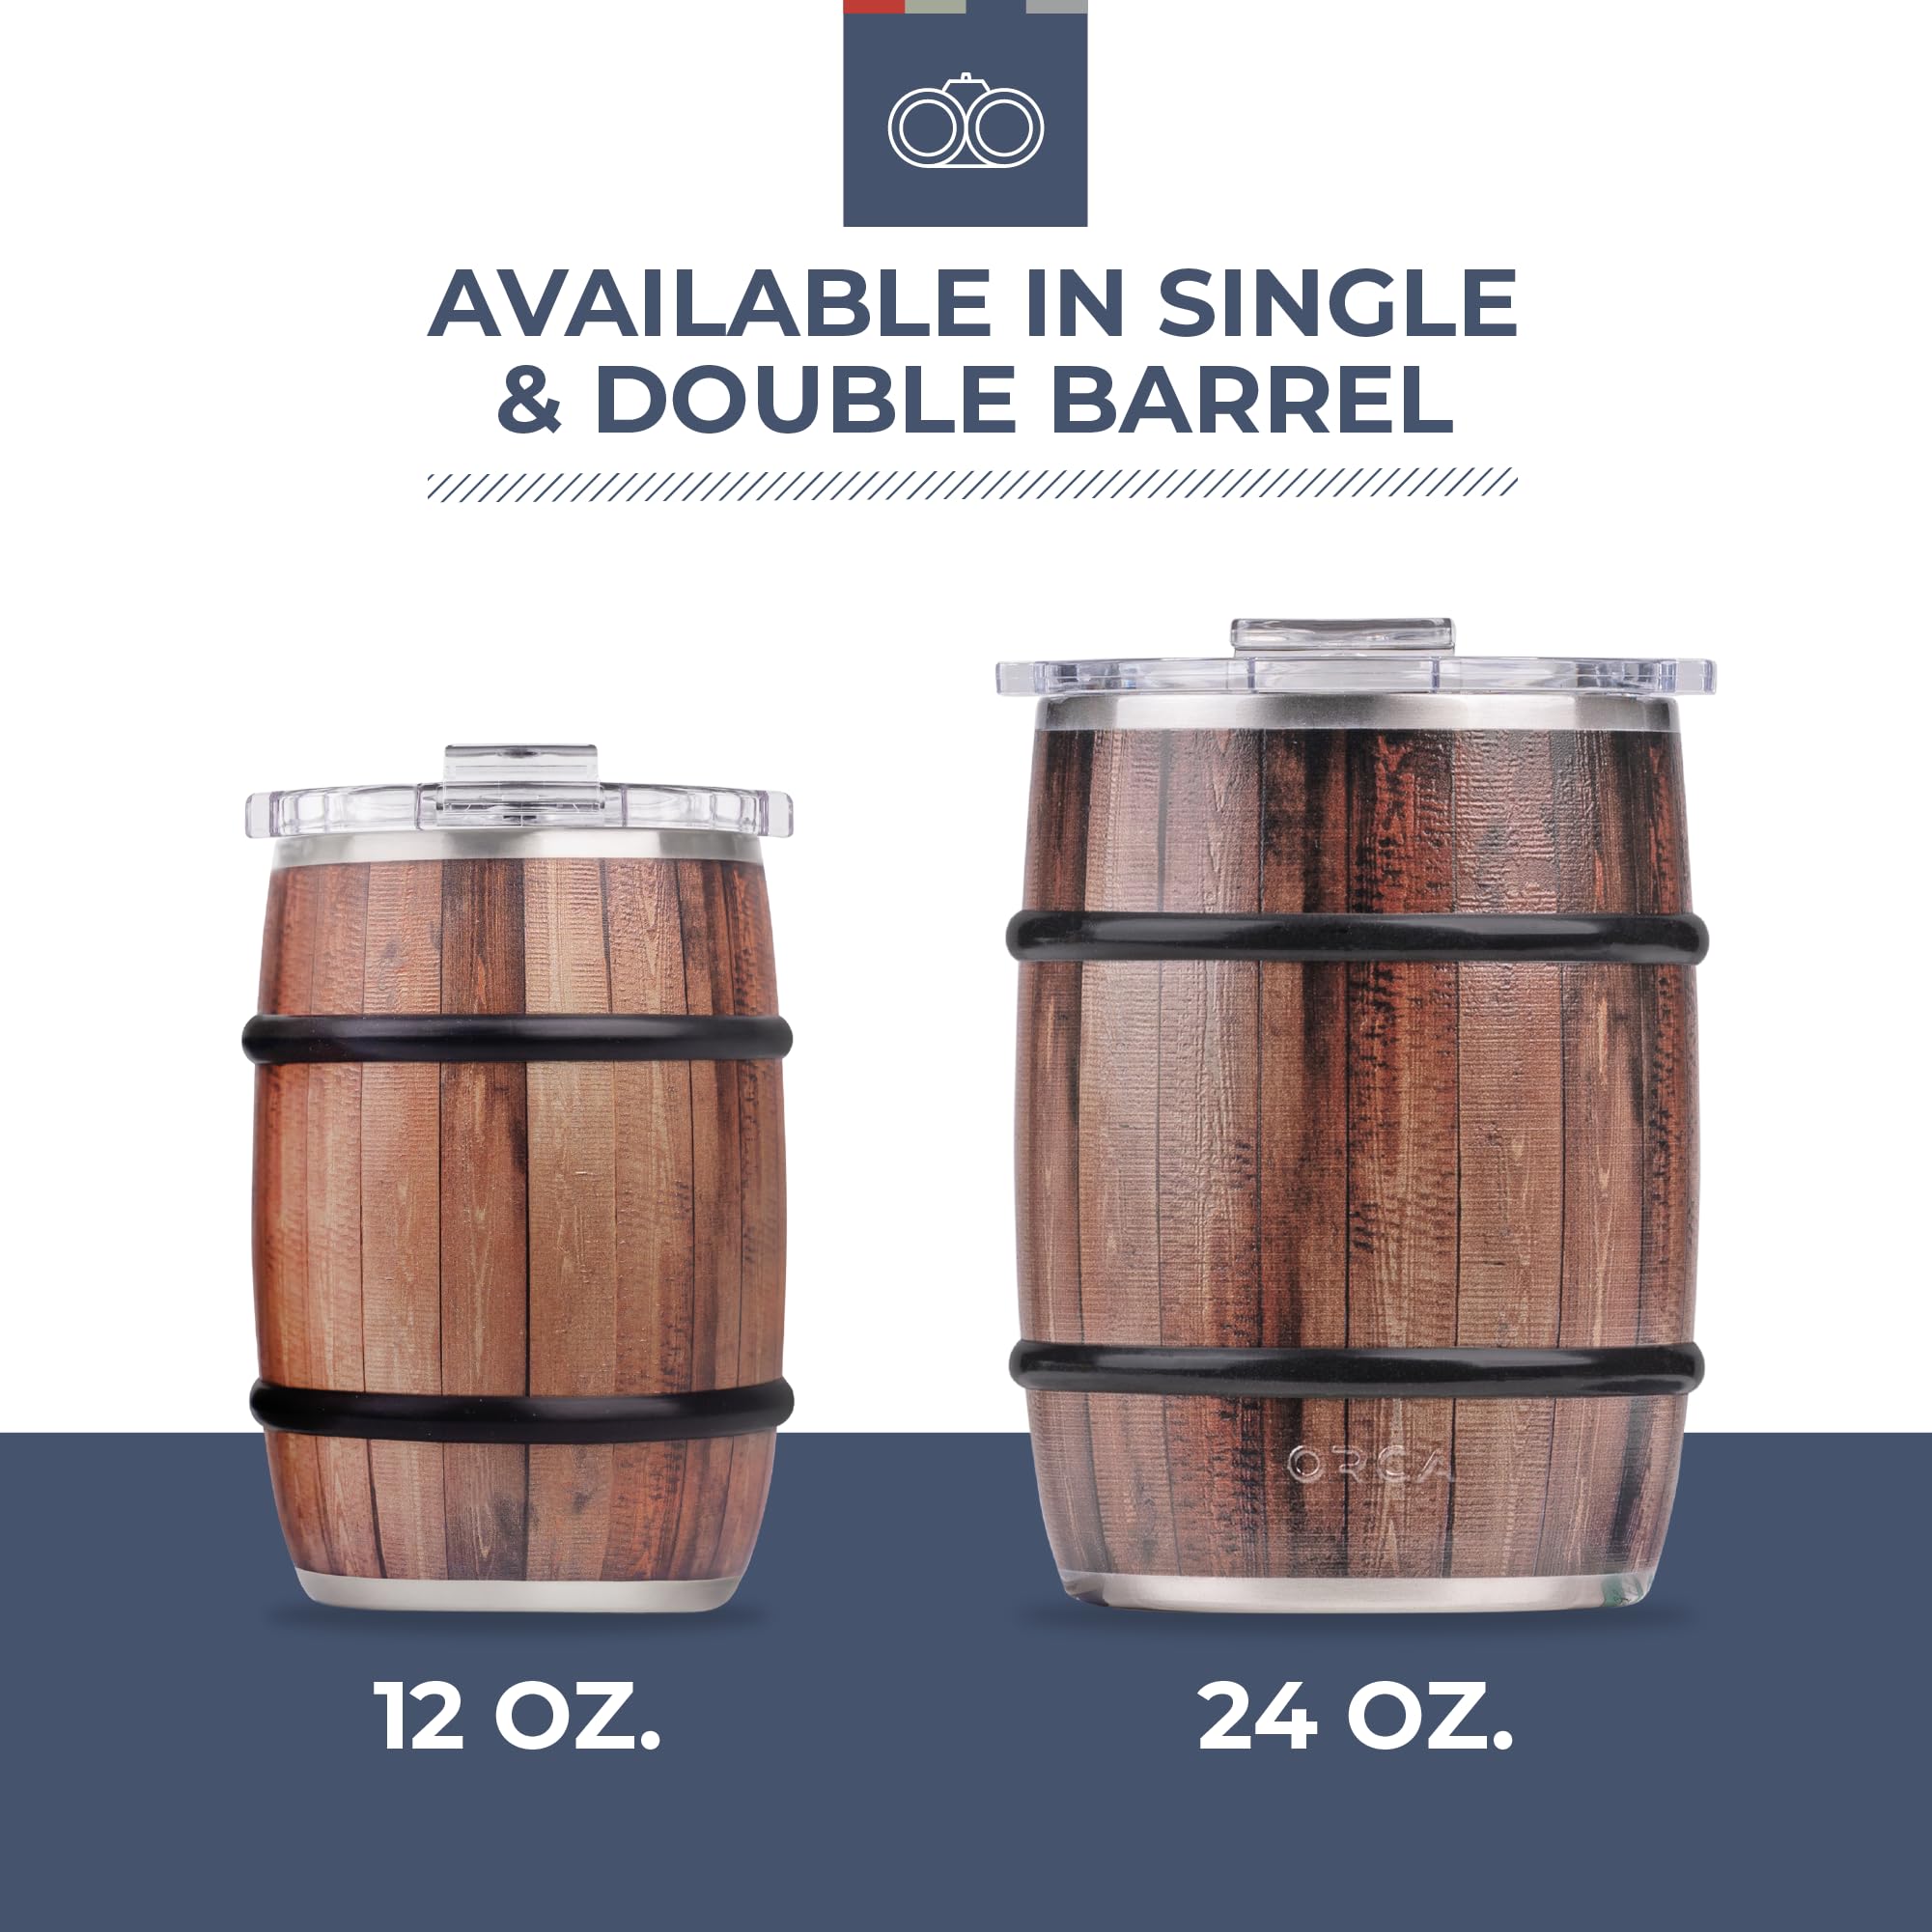 ORCA Barrel 12oz | Temperature Insulated, Stainless Steel Tumbler with a Classy Wood Grain Print, for Whiskey, Beer, Coffee or Whatever You're Having — White Oak